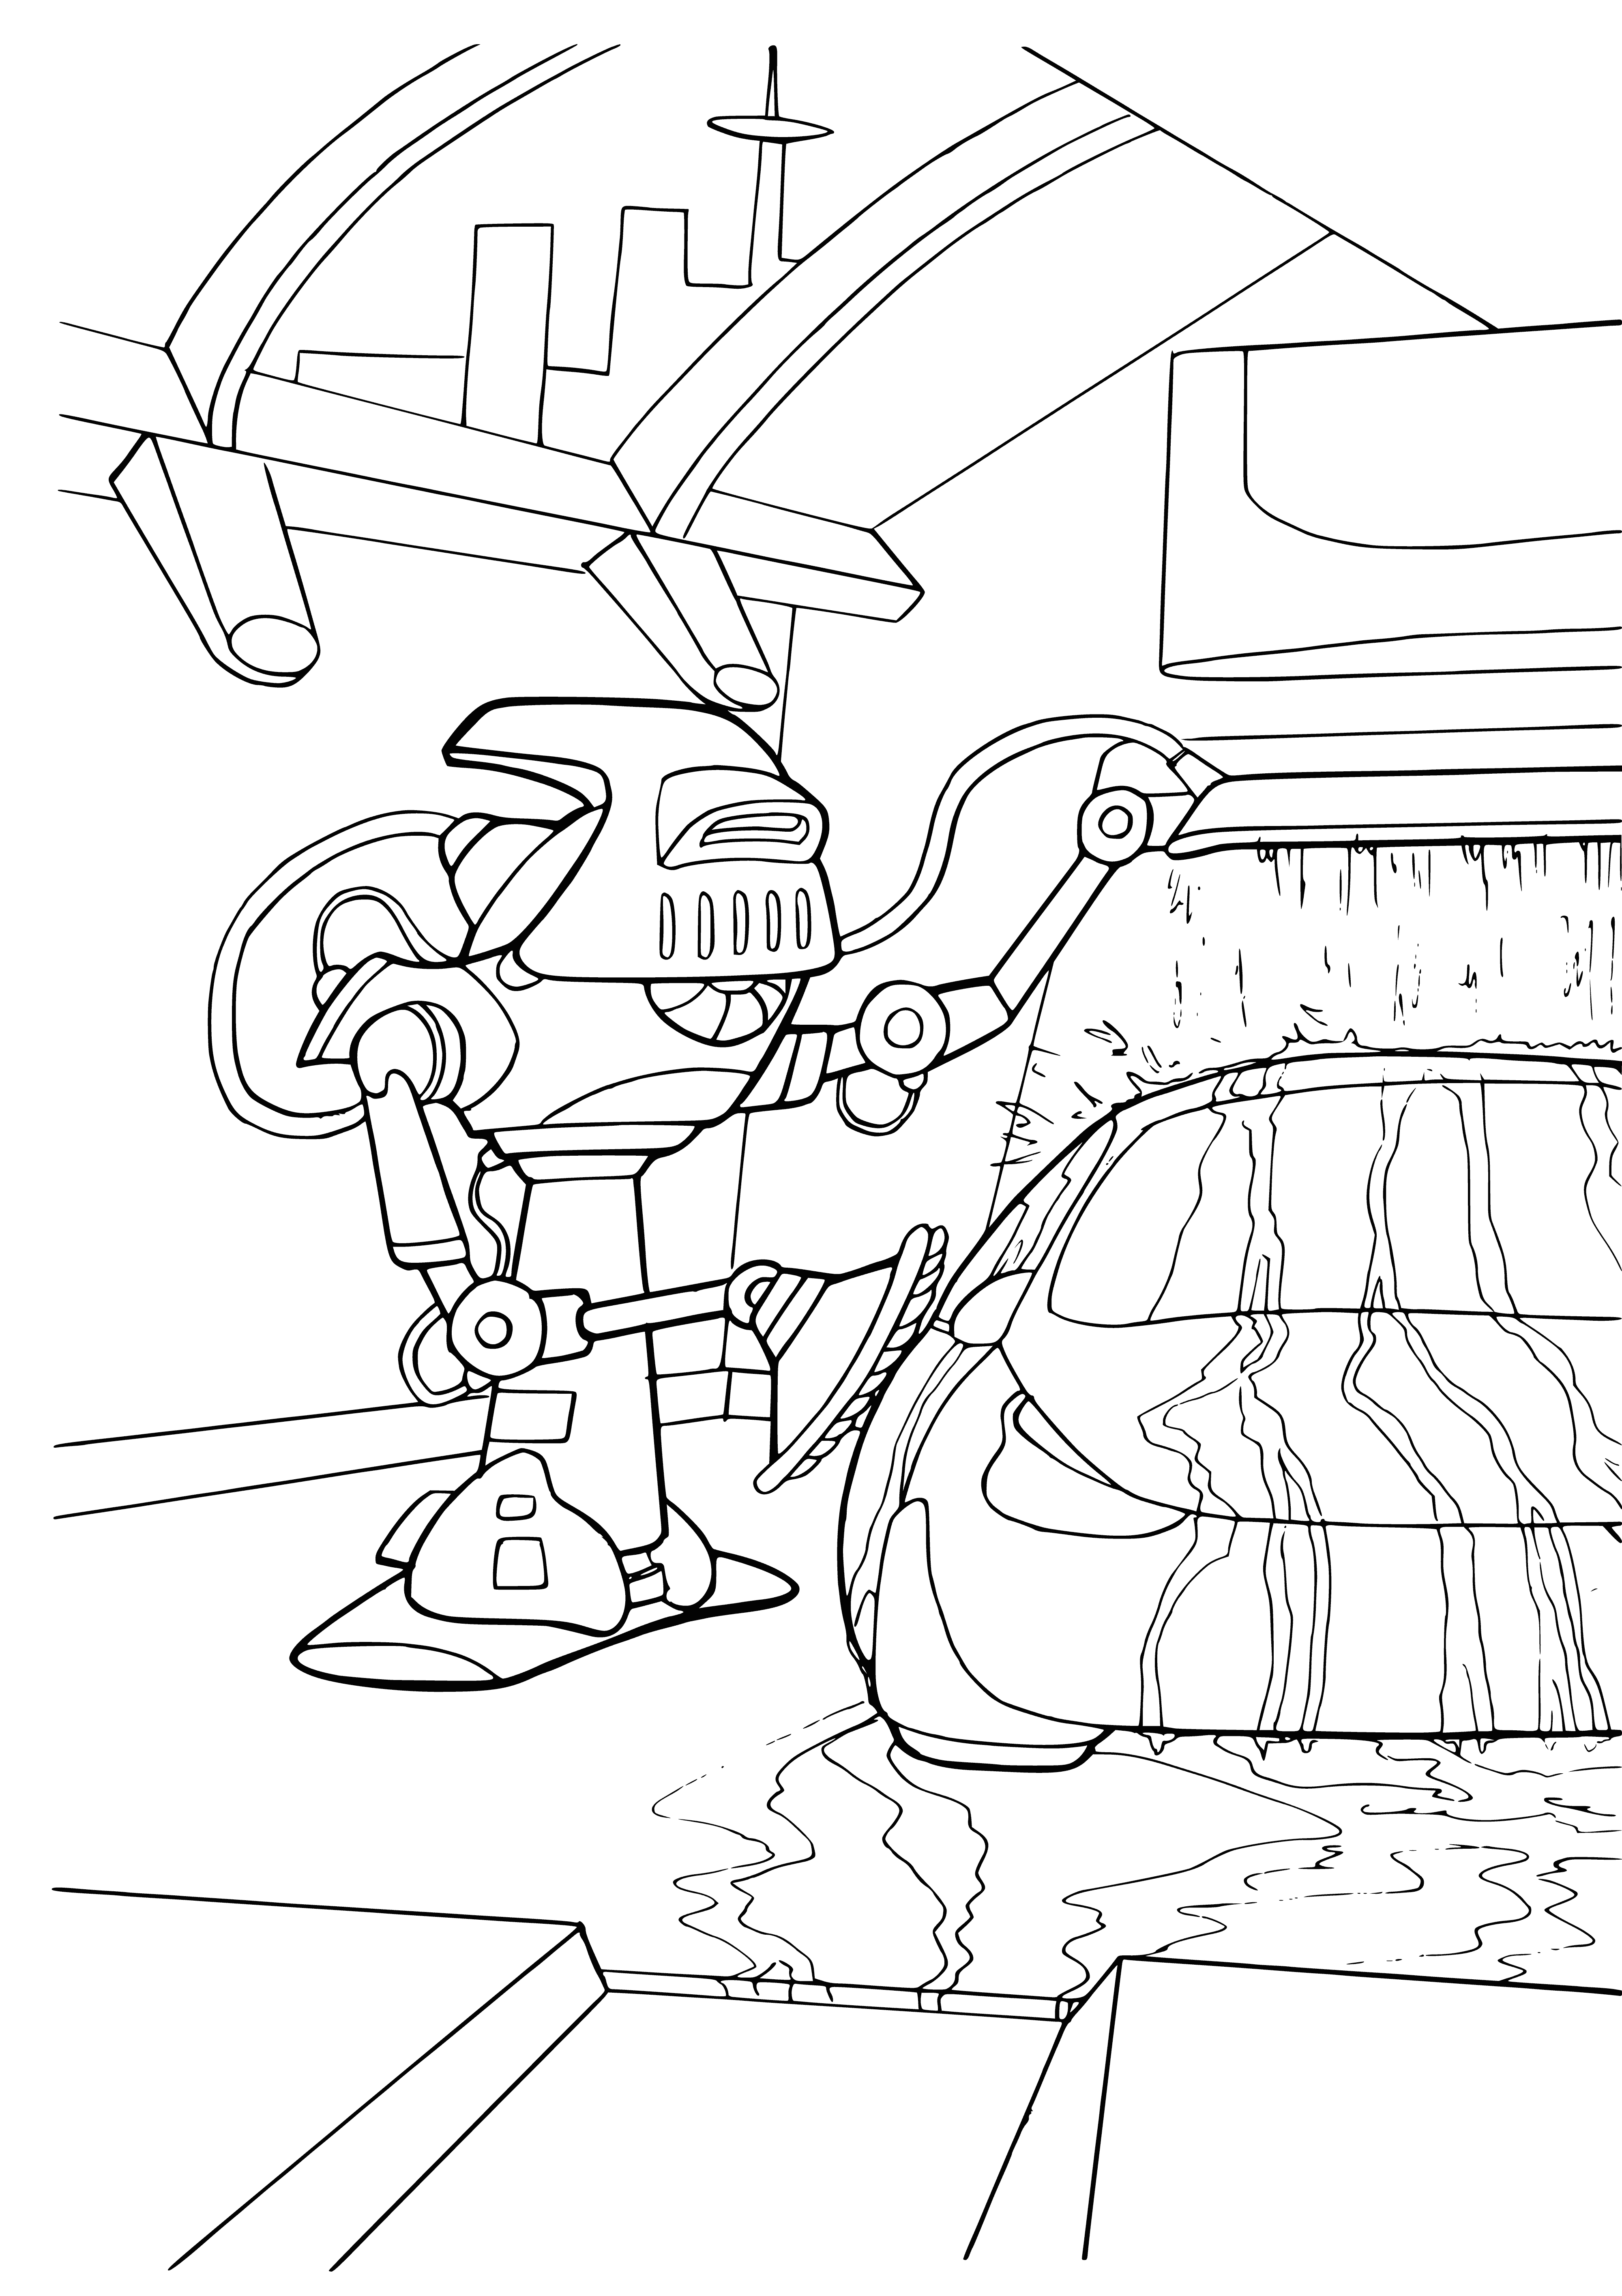 coloring page: Robot car wash uses robots equipped with brushes and cleaning solutions to wash the car's exterior and vacuums to clean its interior.